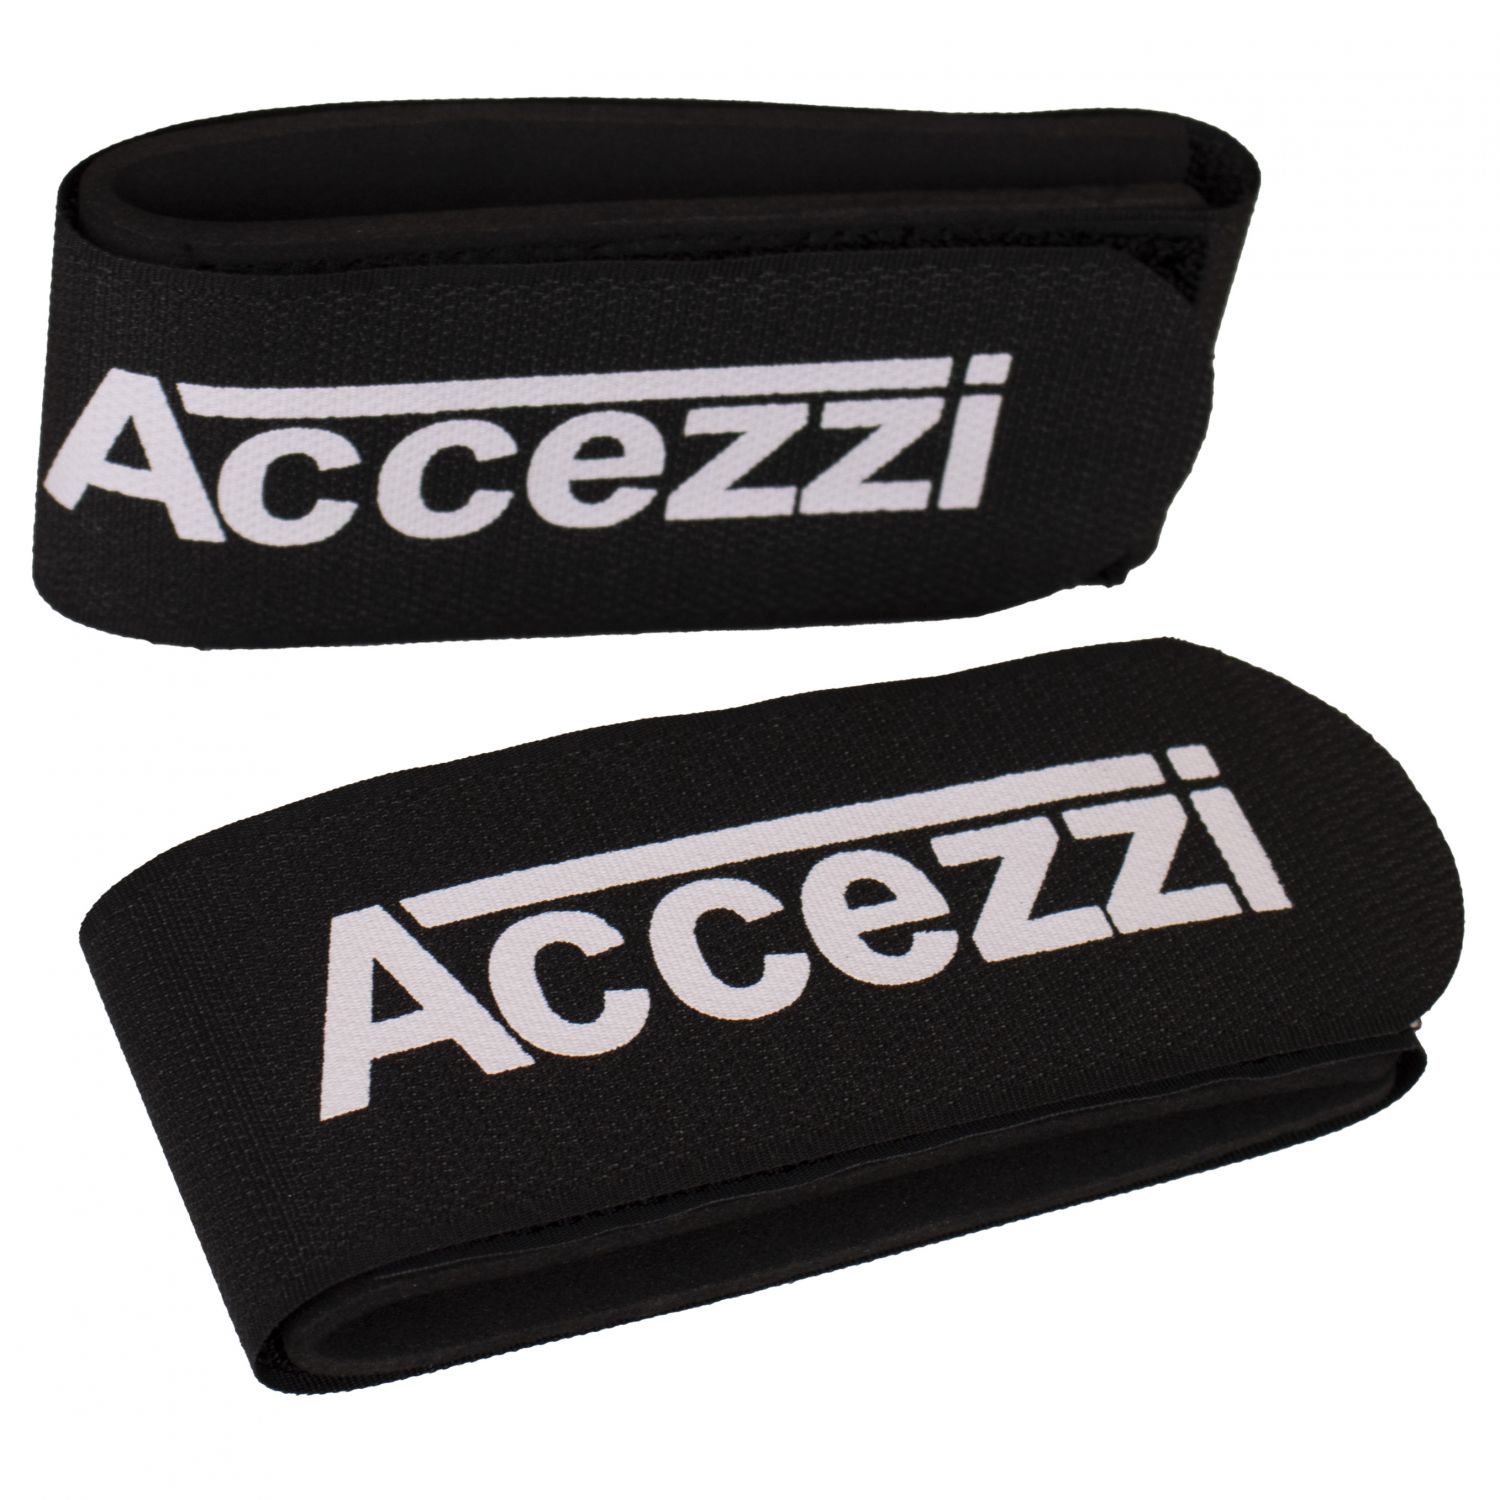 Accezzi skidclips till carvingskidor